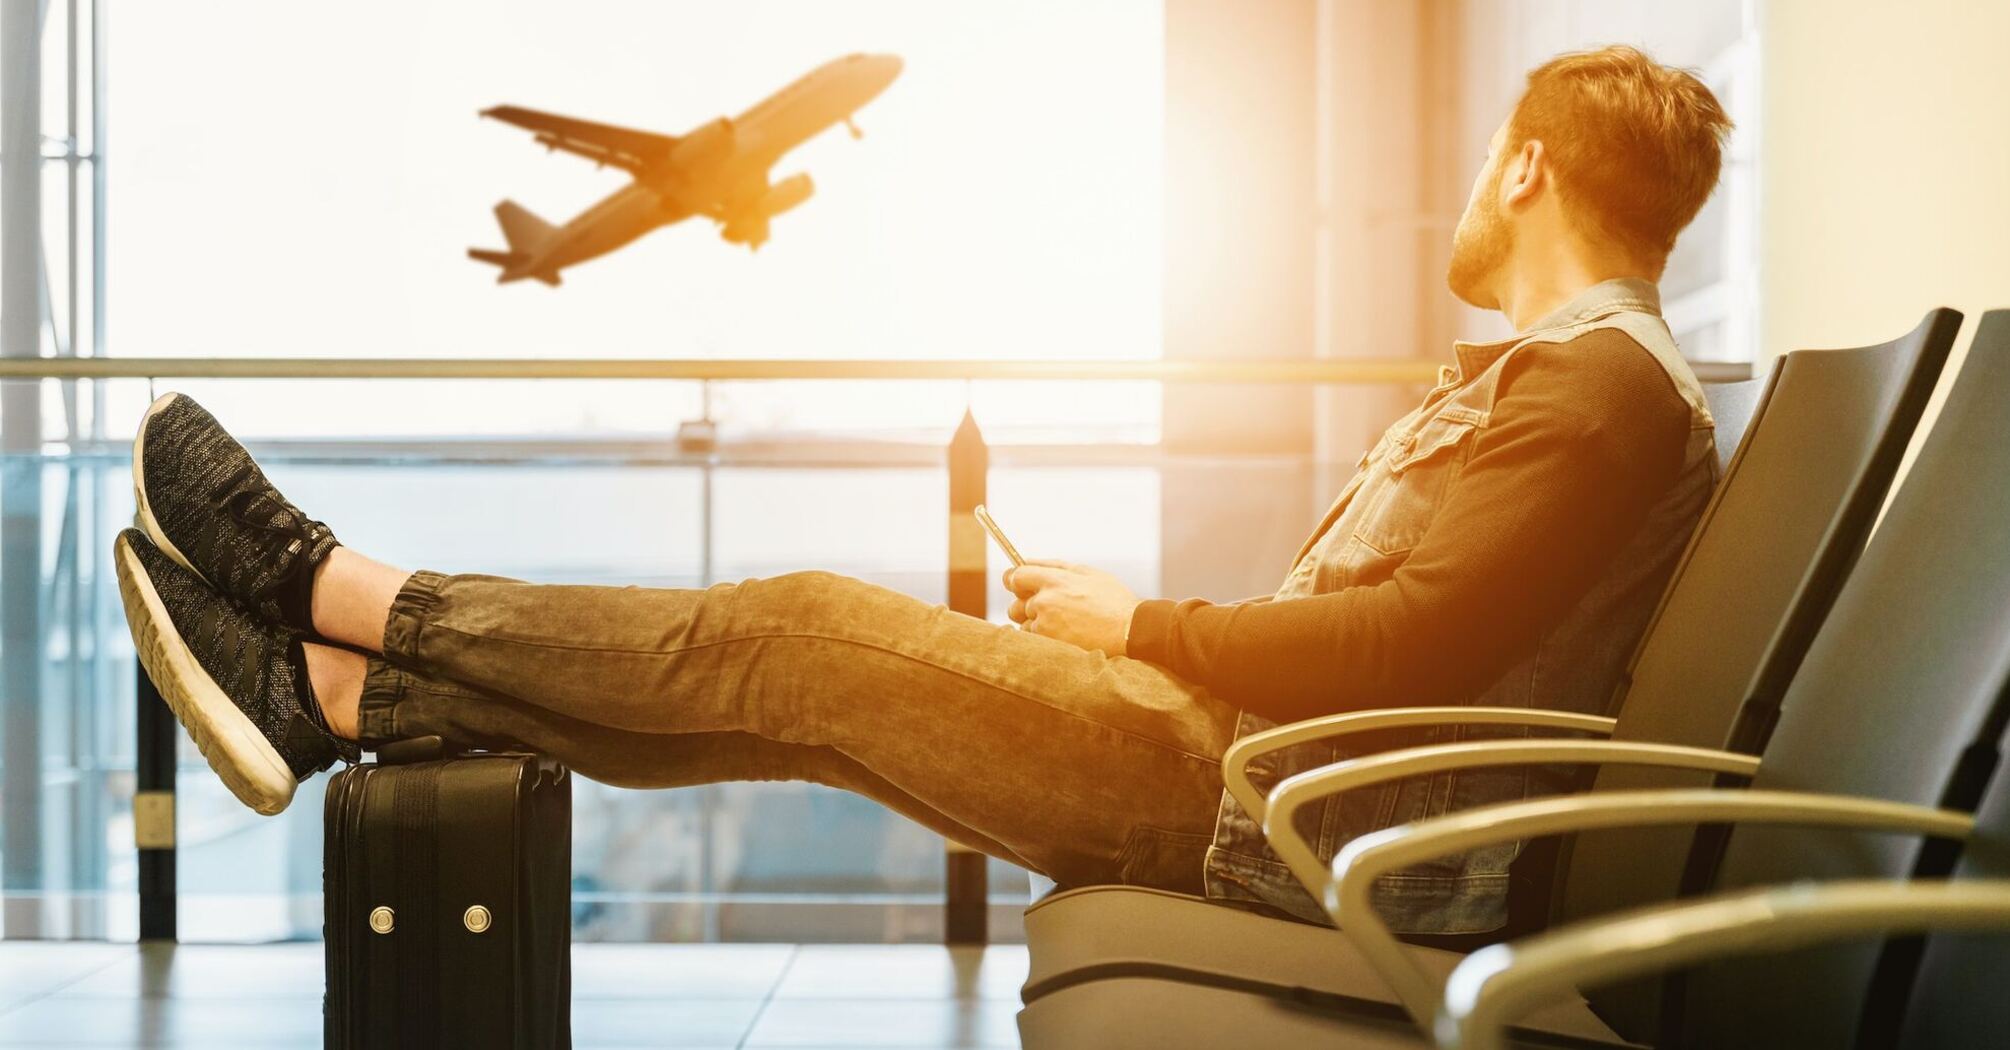 Man sitting on gang chair with feet on luggage looking at airplane